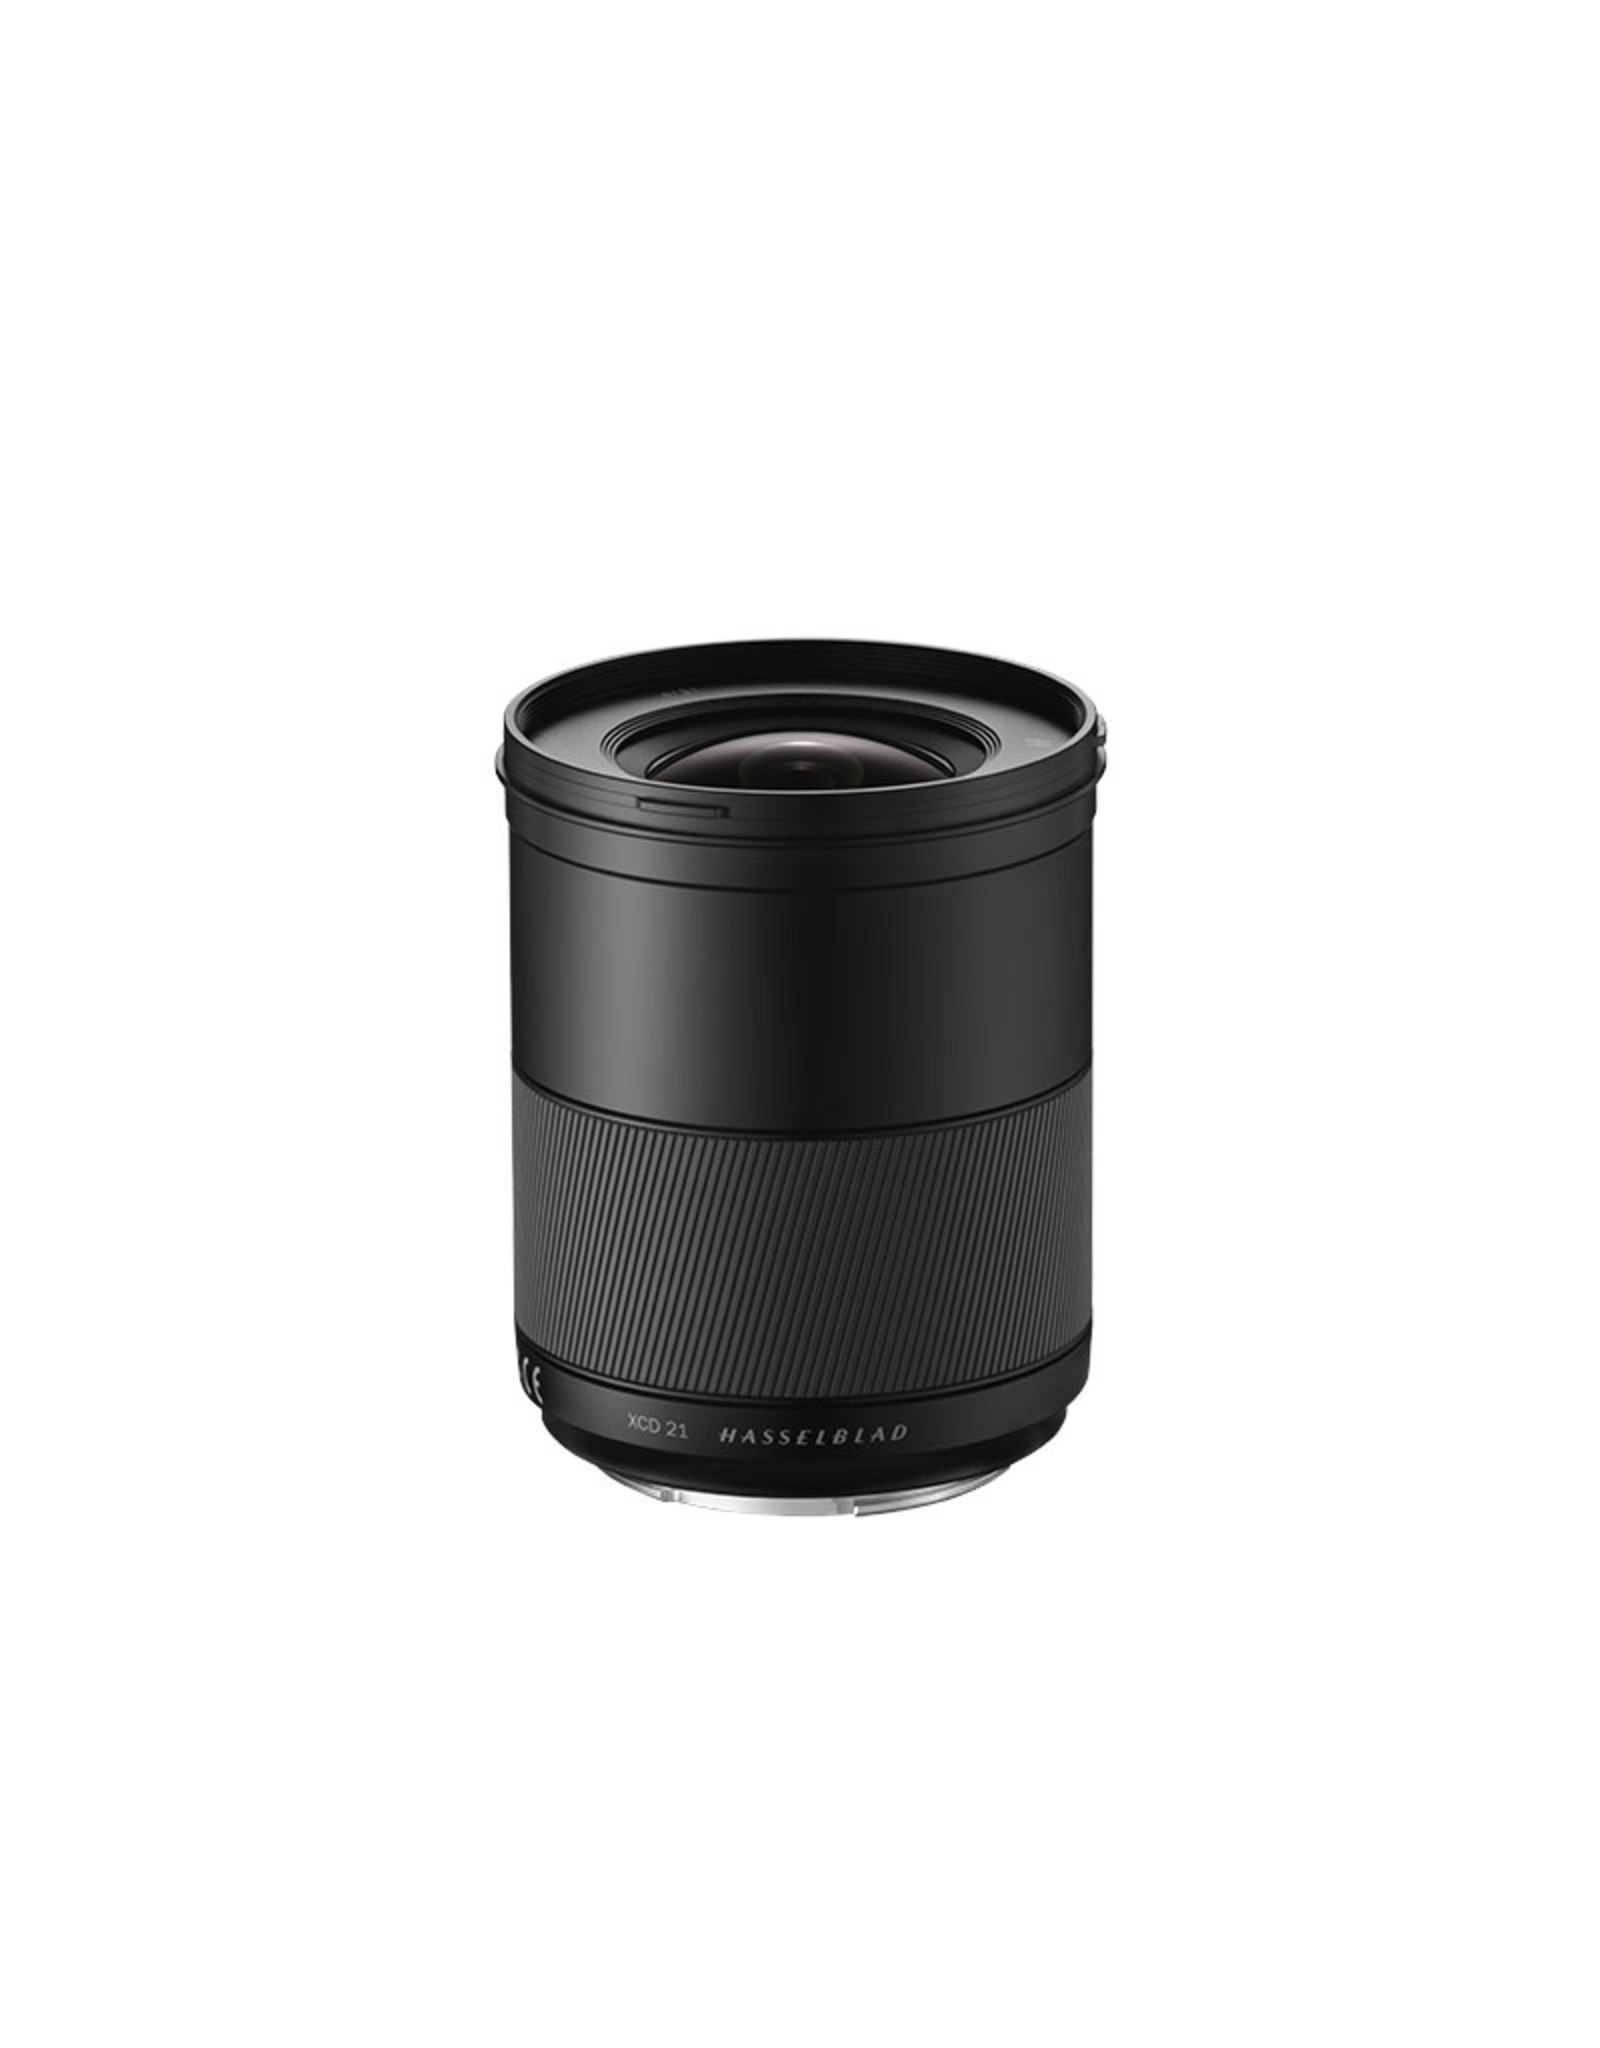 Hasselblad Hasselblad XCD 21mm f/4.0 Lens